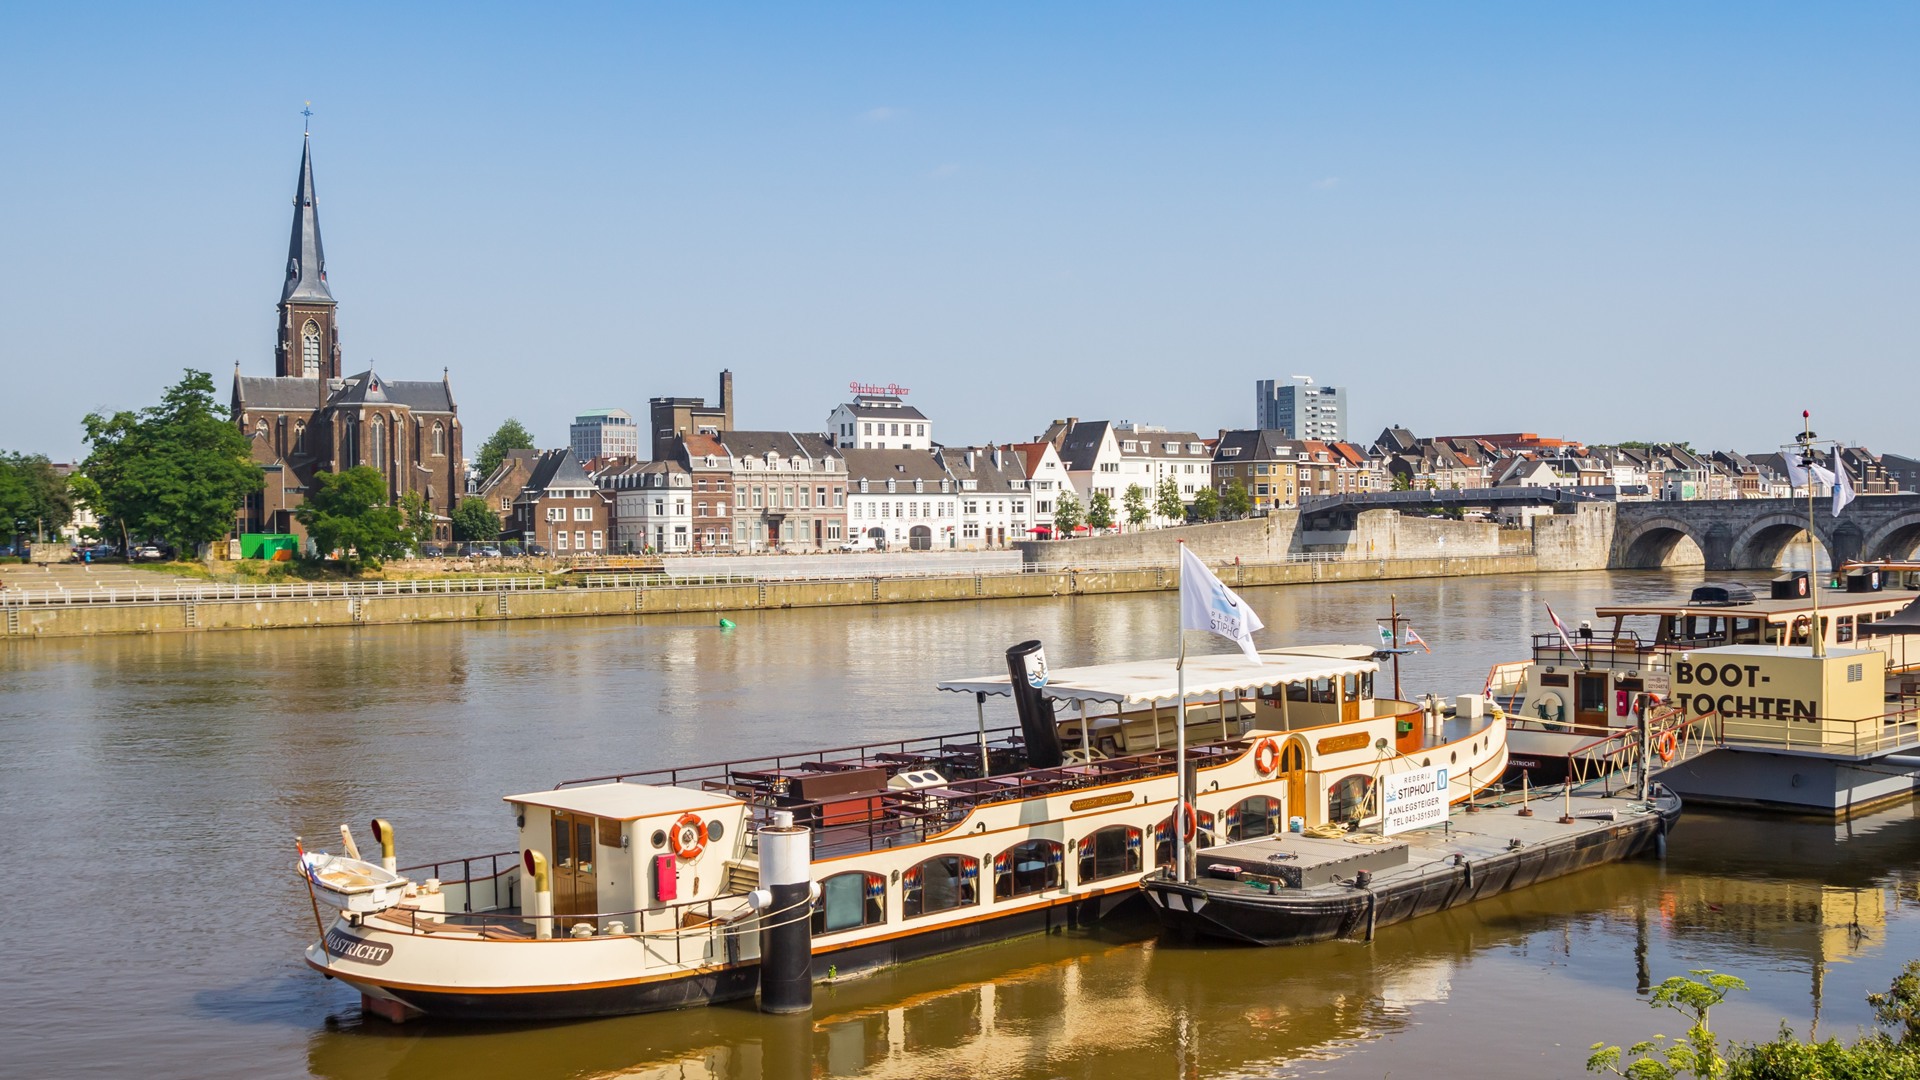 Go on a boat trip on the River Maas and enjoy the good life during your stay in Maastricht